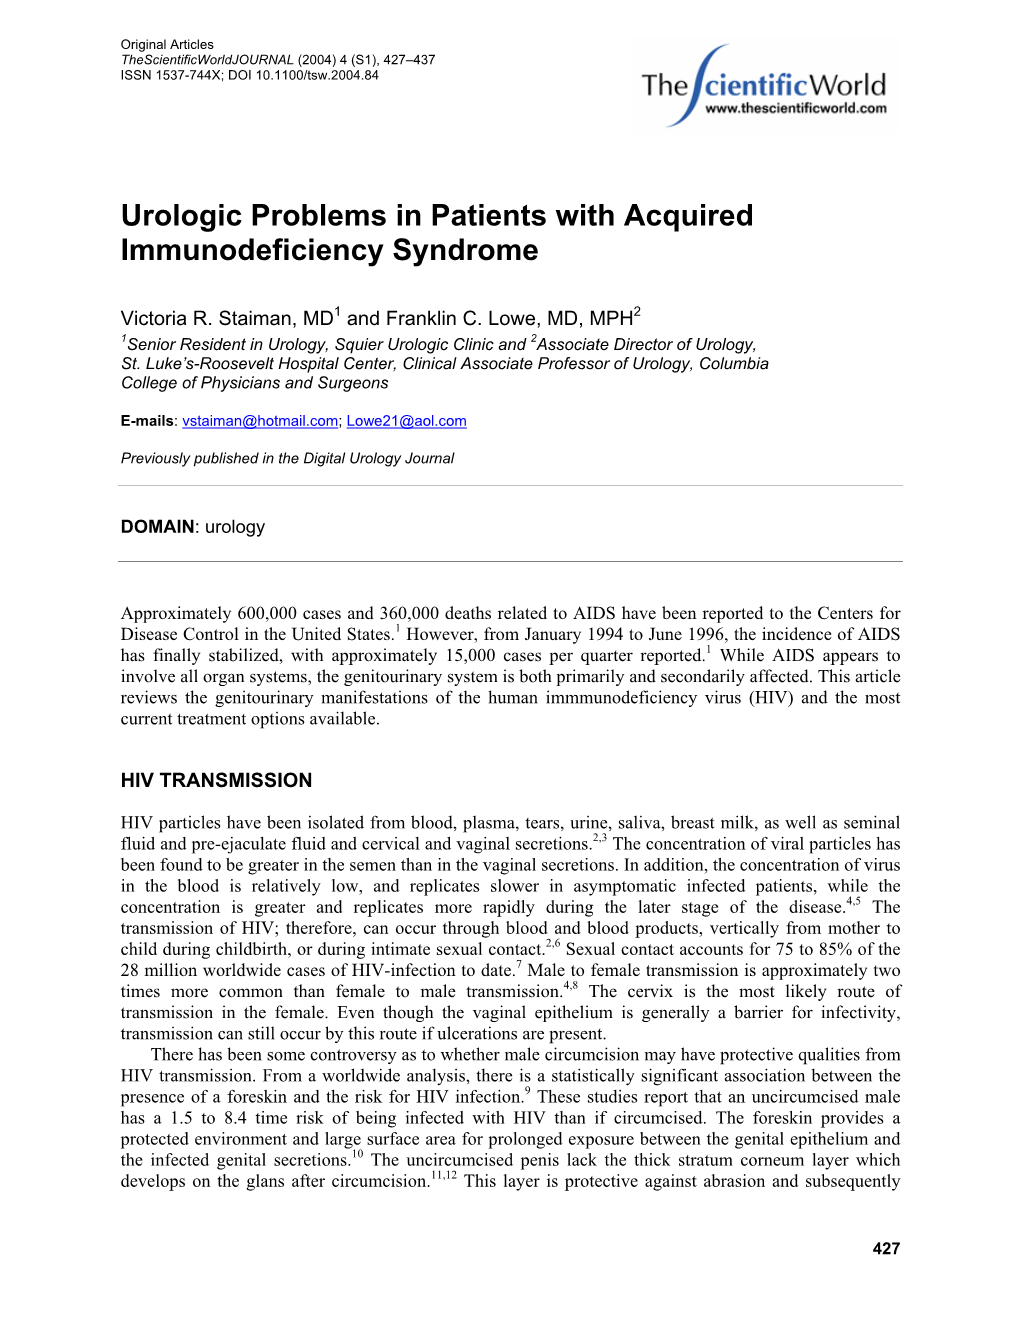 Urologic Problems in Patients with Acquired Immunodeficiency Syndrome